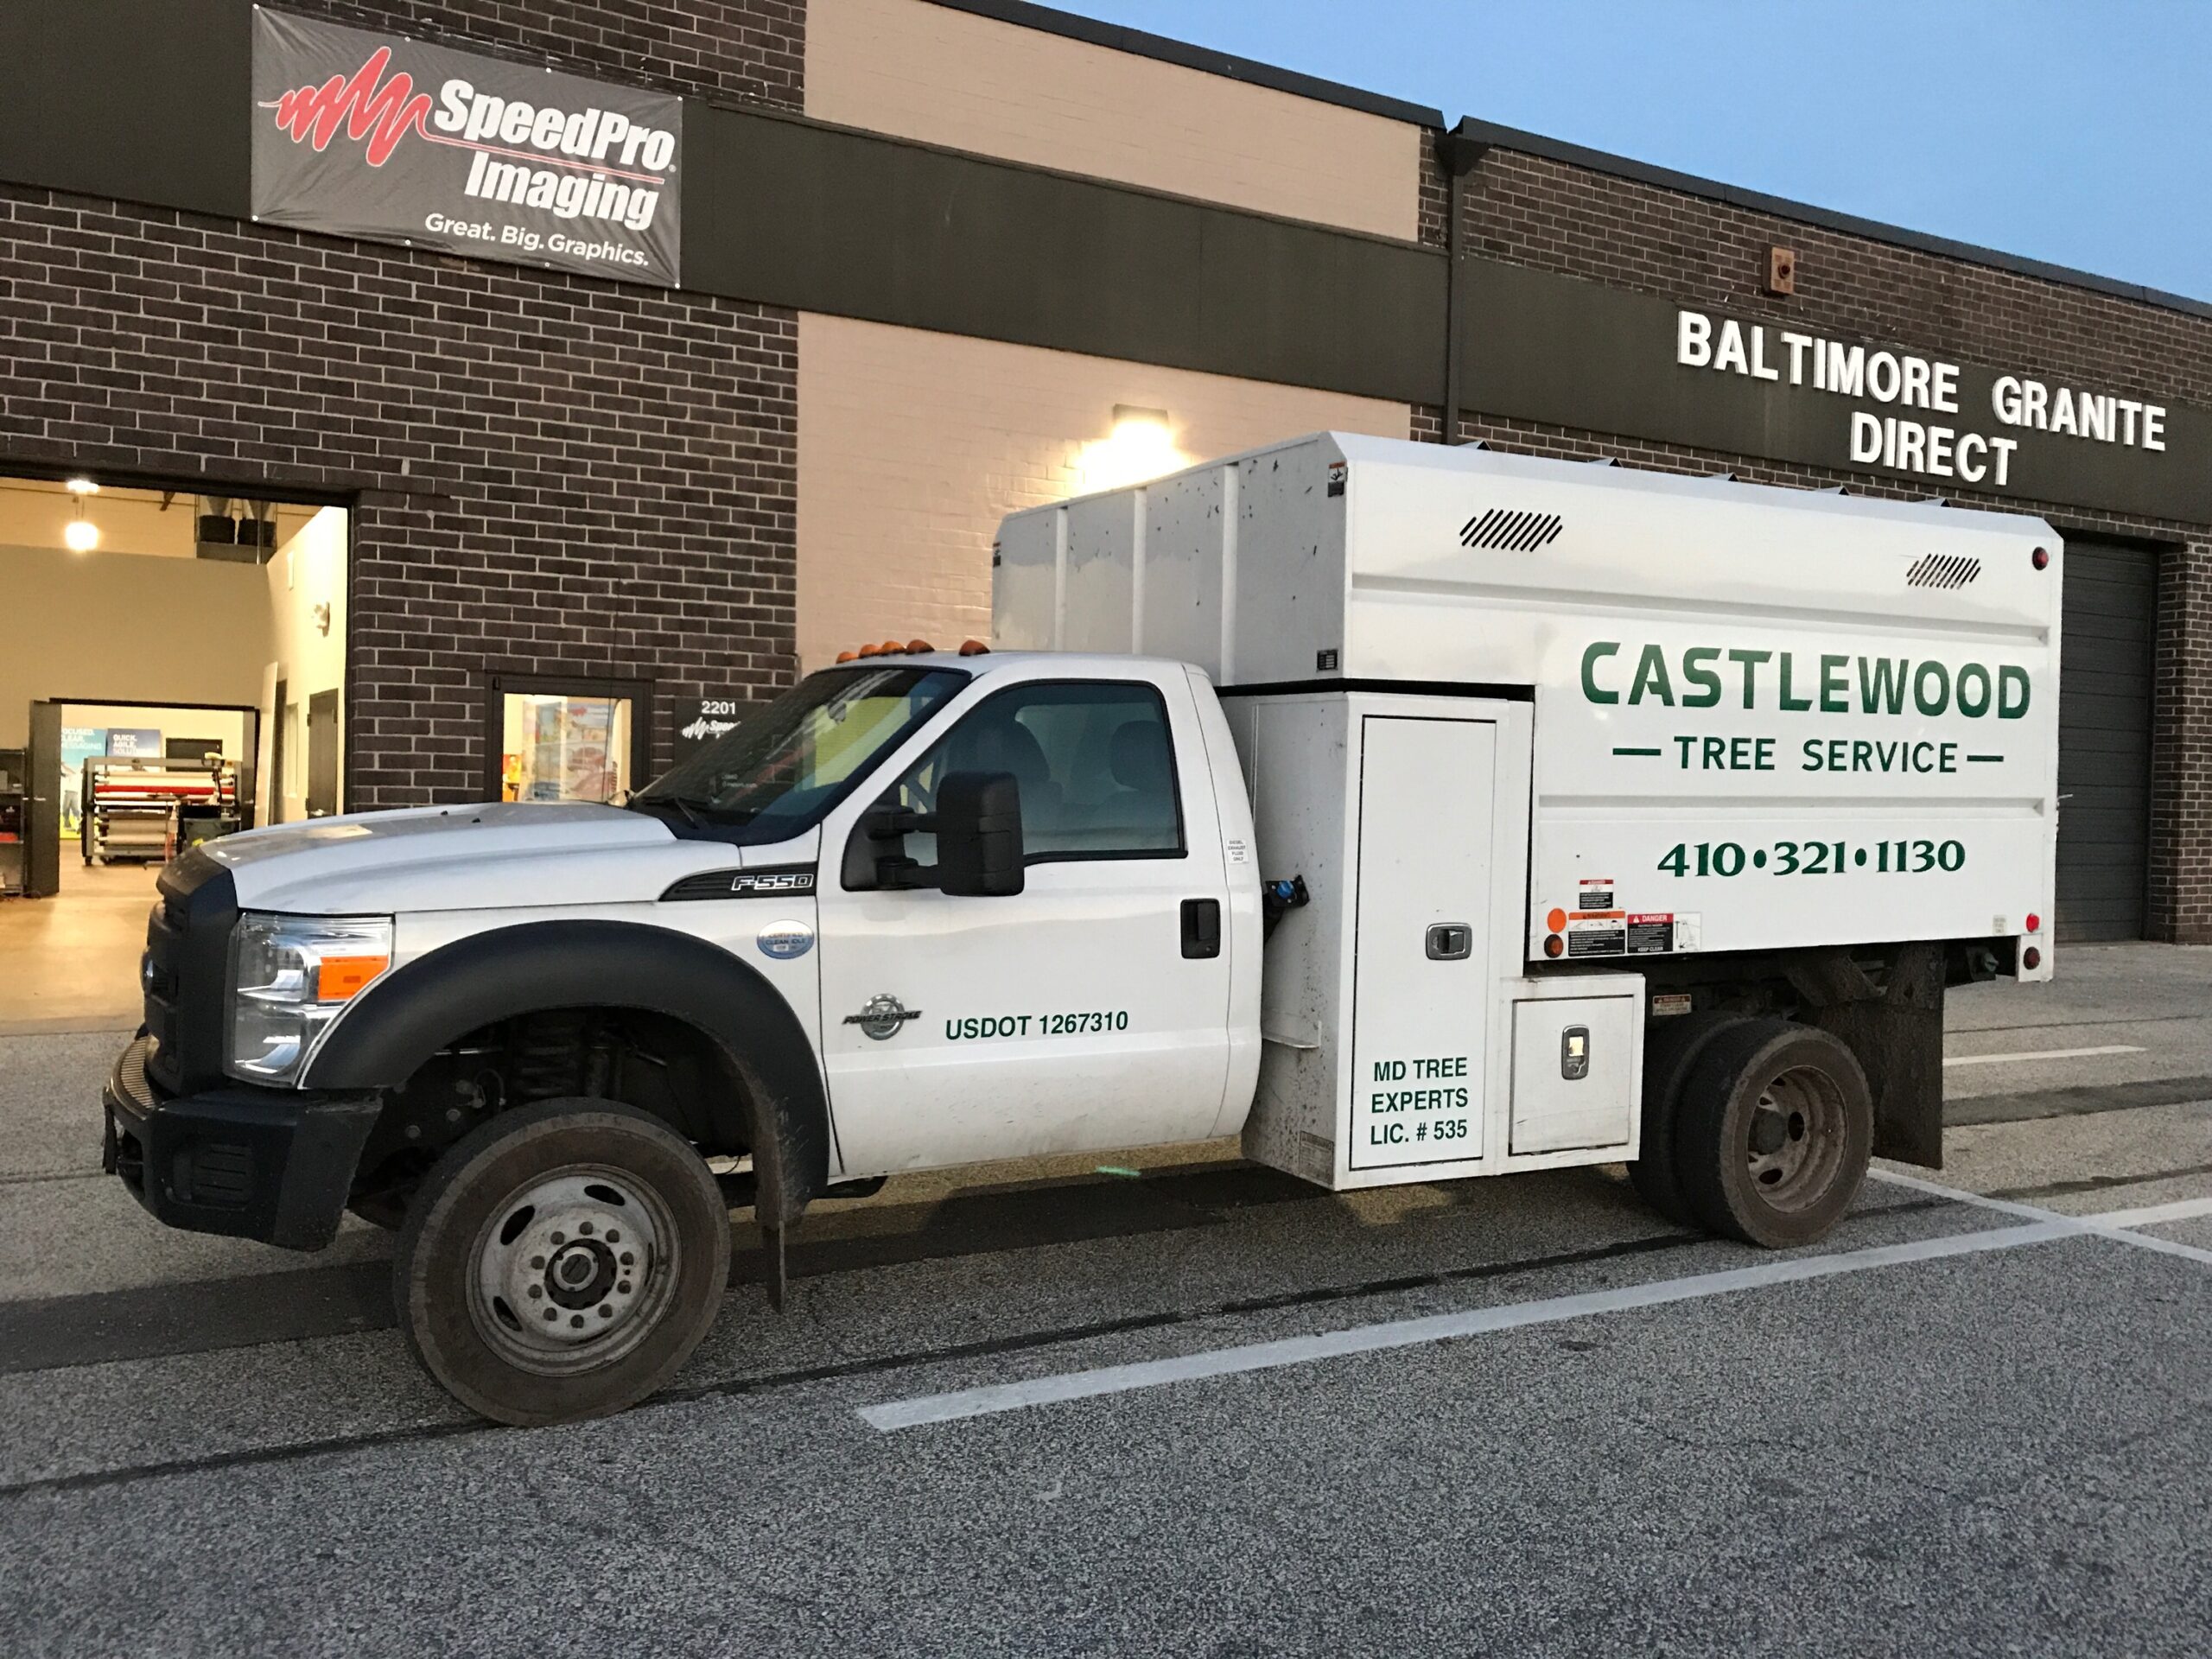 Castlewood Tree Service Truck in Front of SpeedPro Imaging